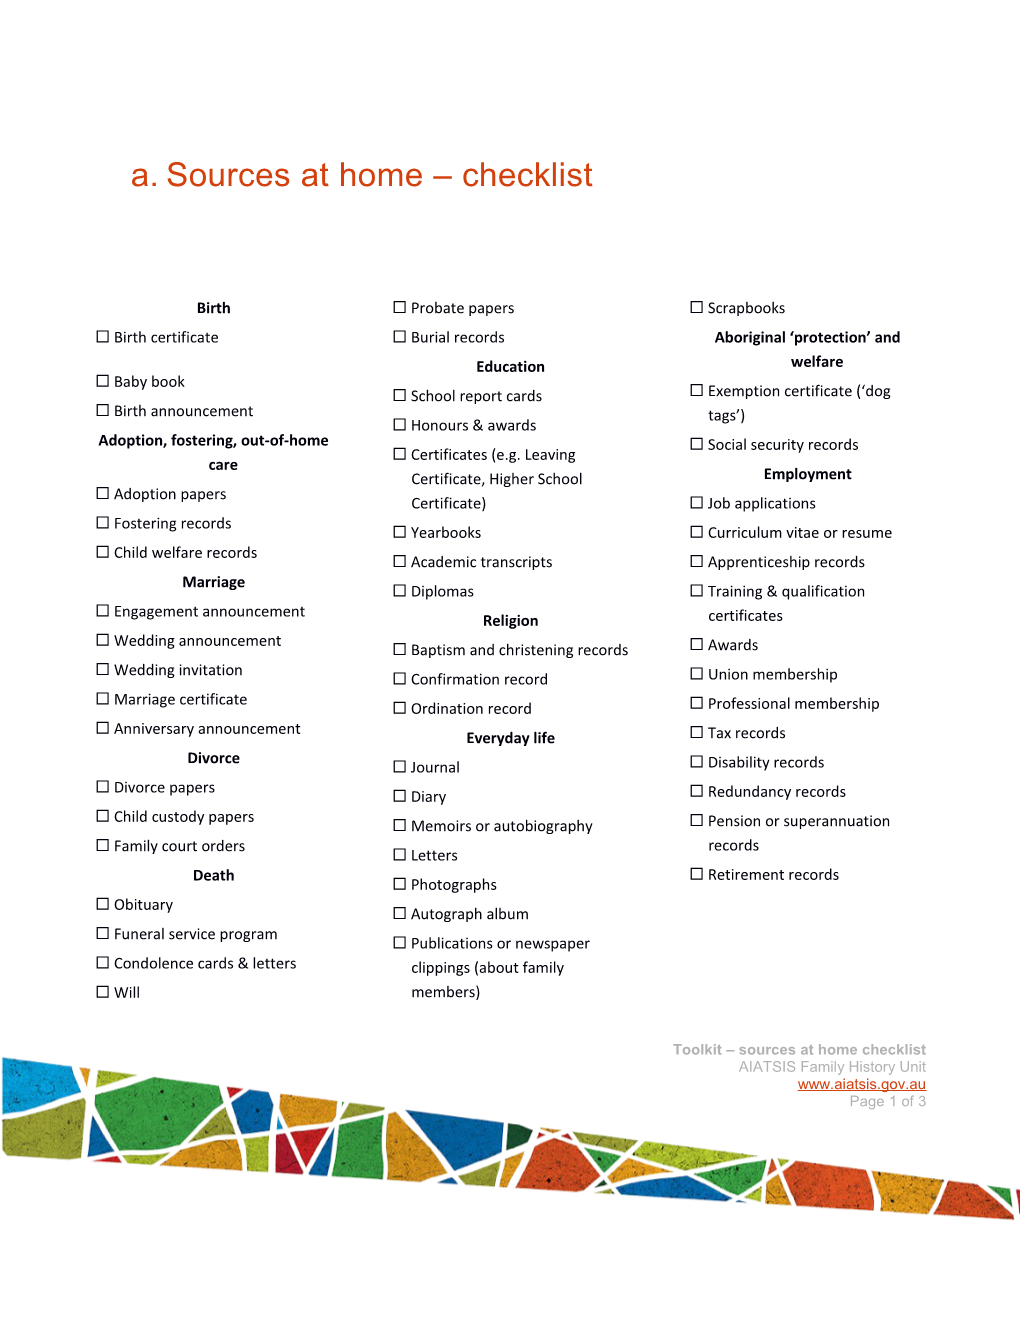 Toolkit - Sources at Home Checklist